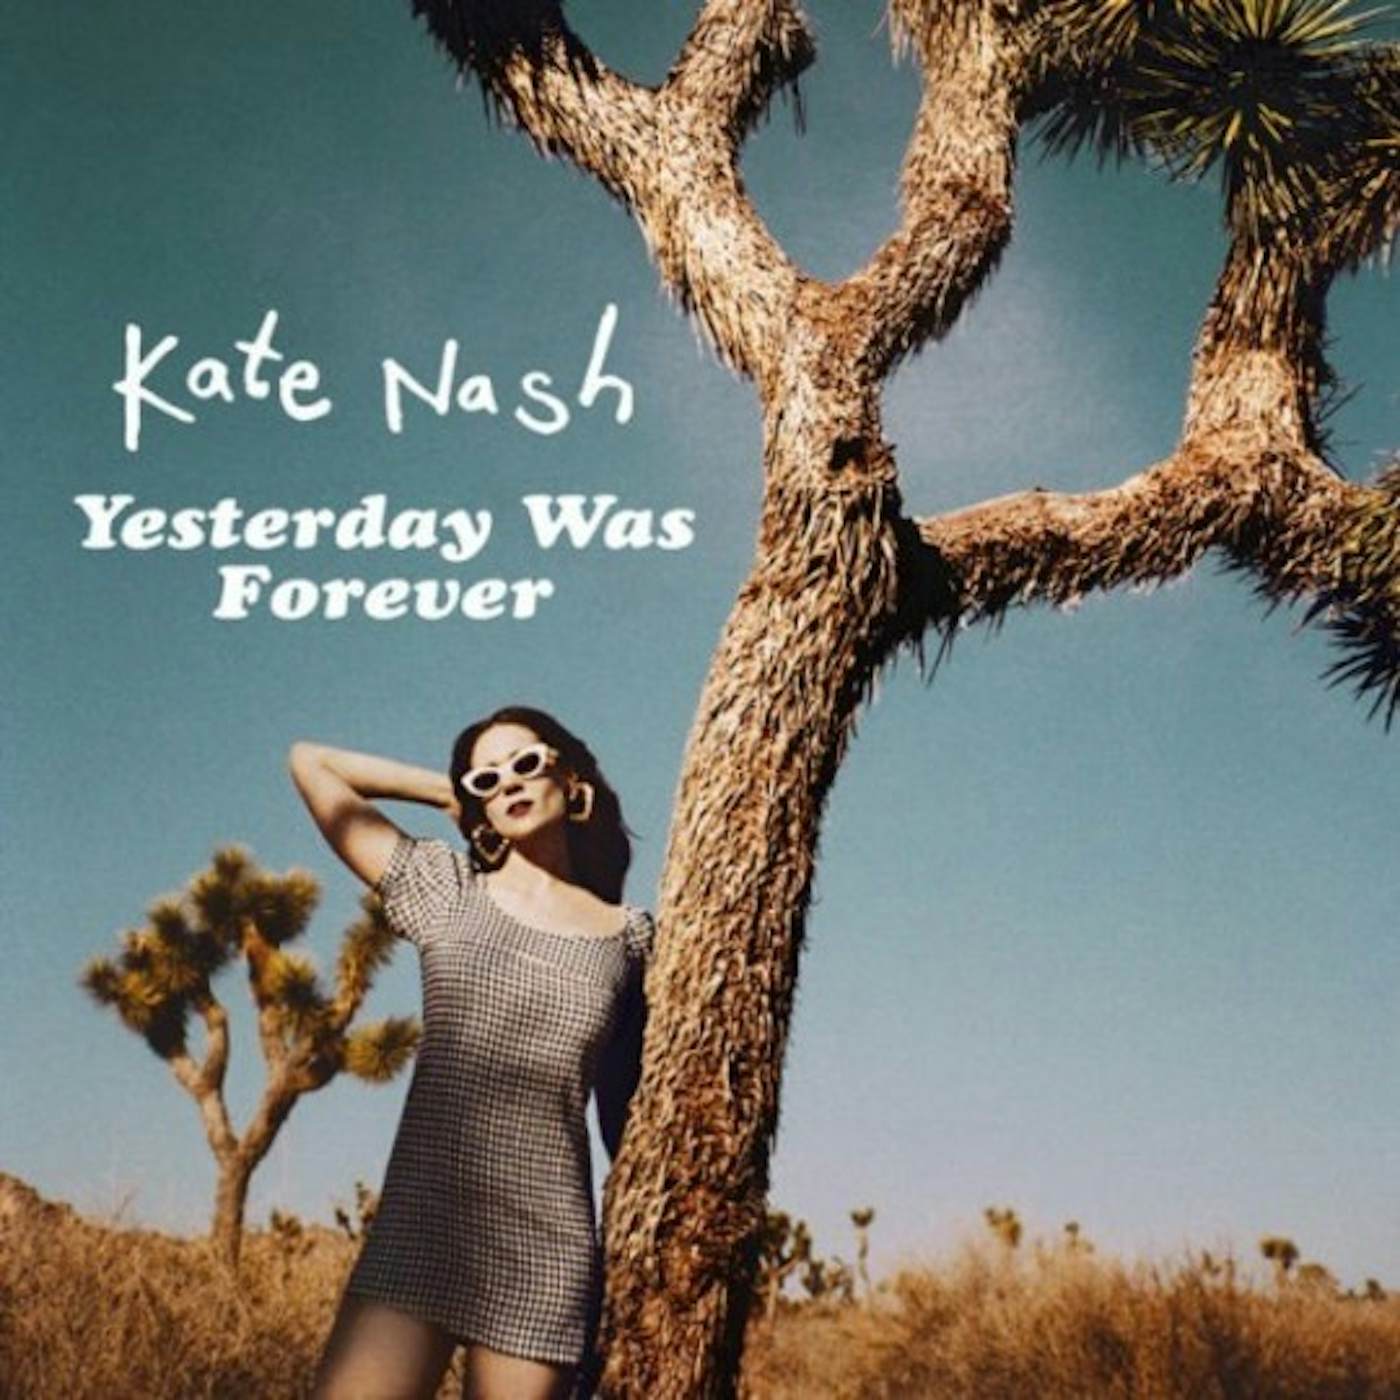 Kate Nash YESTERDAY WAS FOREVER CD